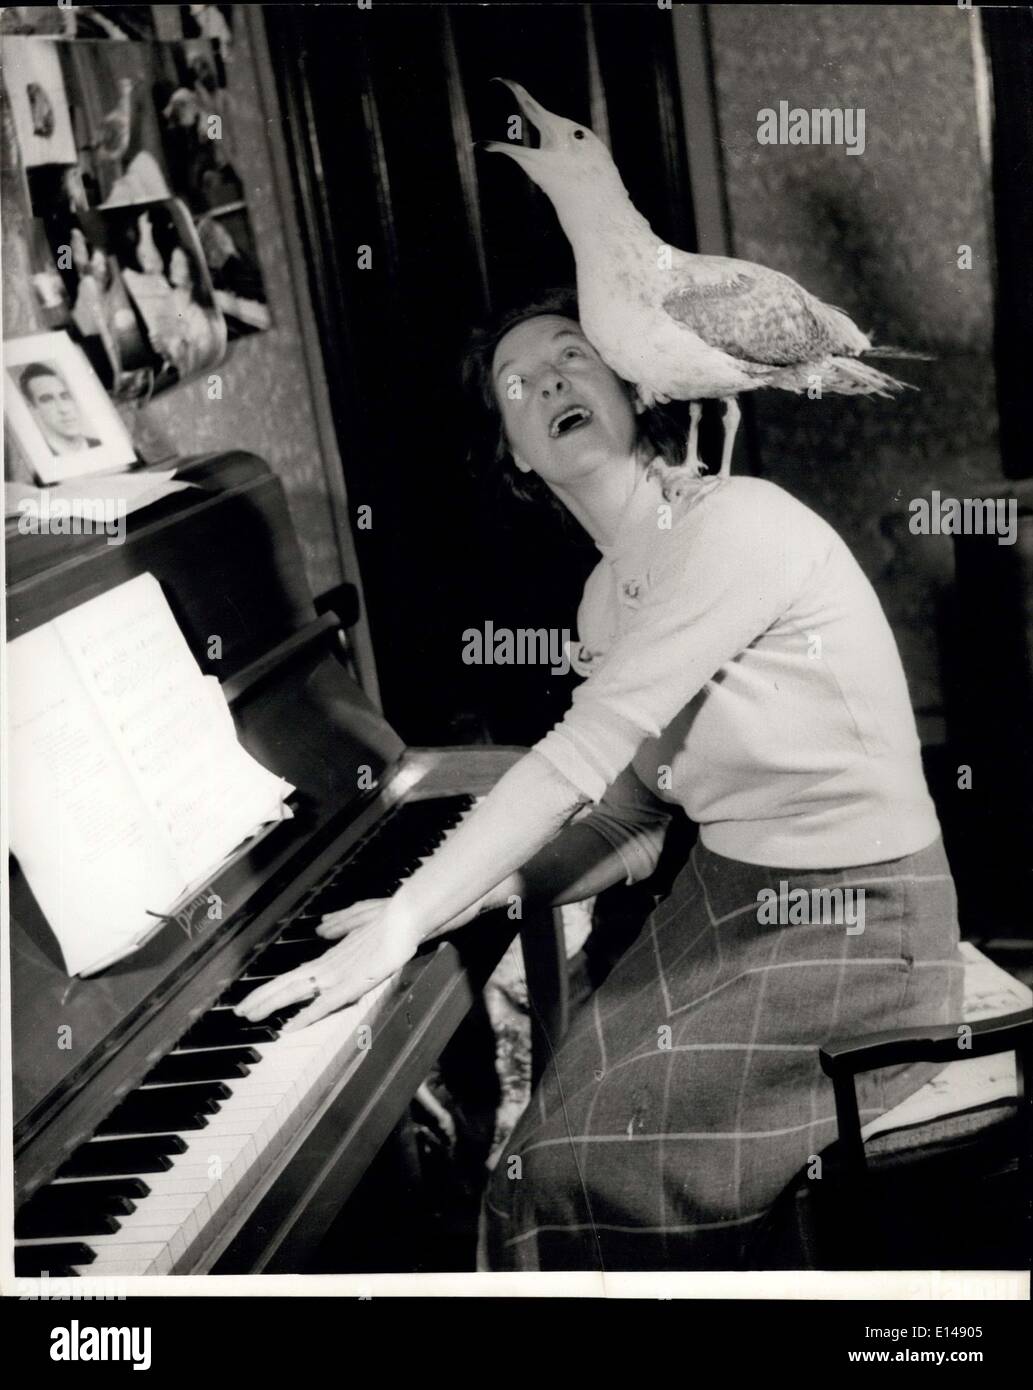 Apr. 17, 2012 - Peter is a musically minded seagull and when Mrs. Thorner plays the piano he sits on her shoulder and warbles. Stock Photo